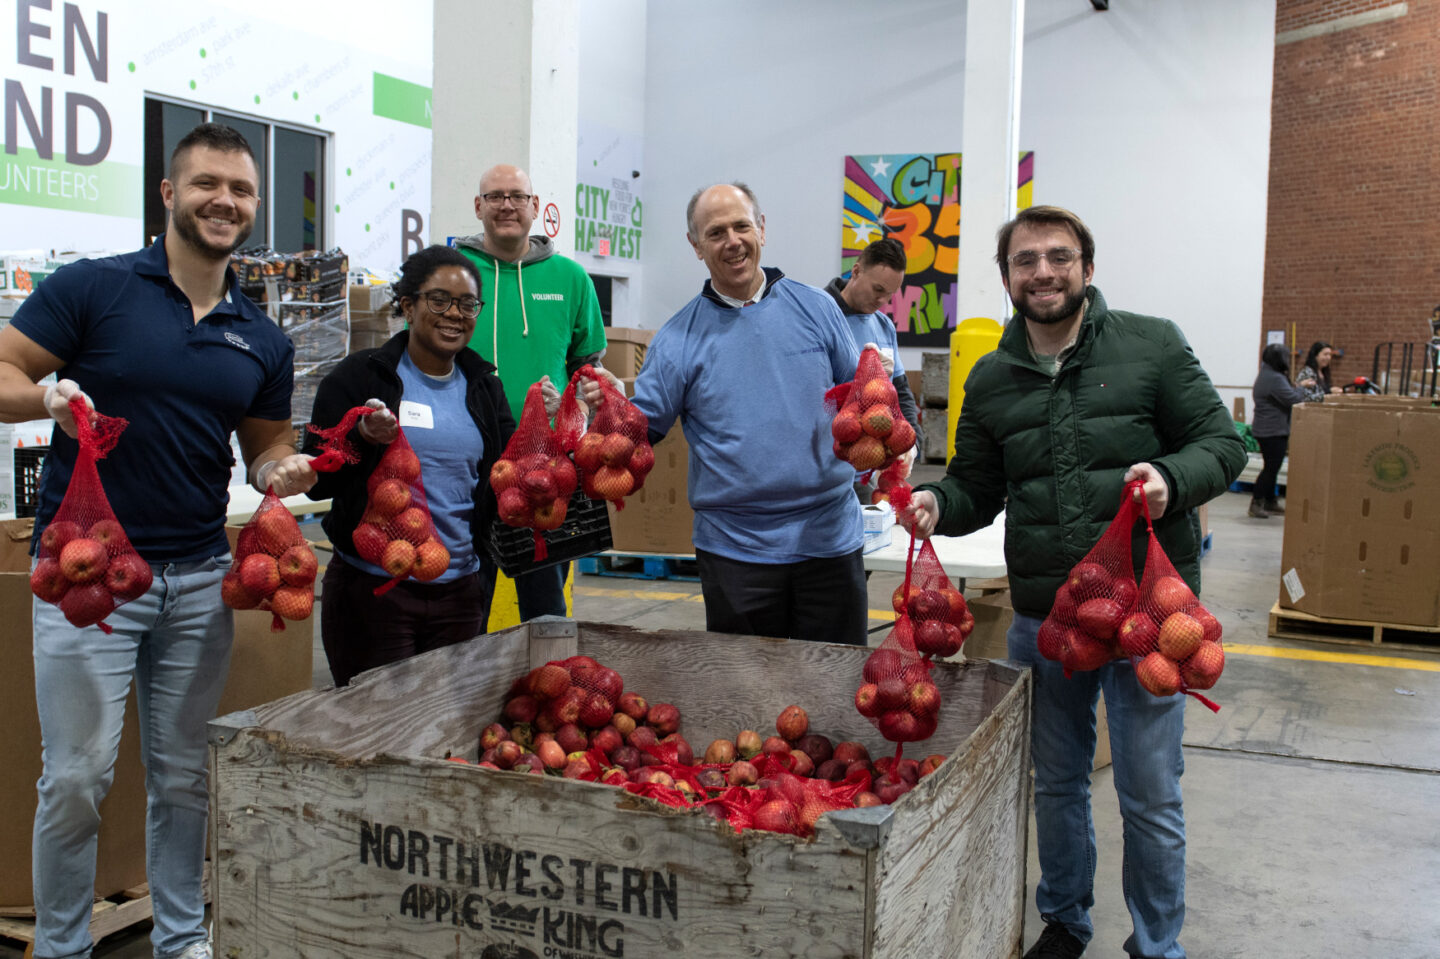 Staff and volunteers hold up containers of apples